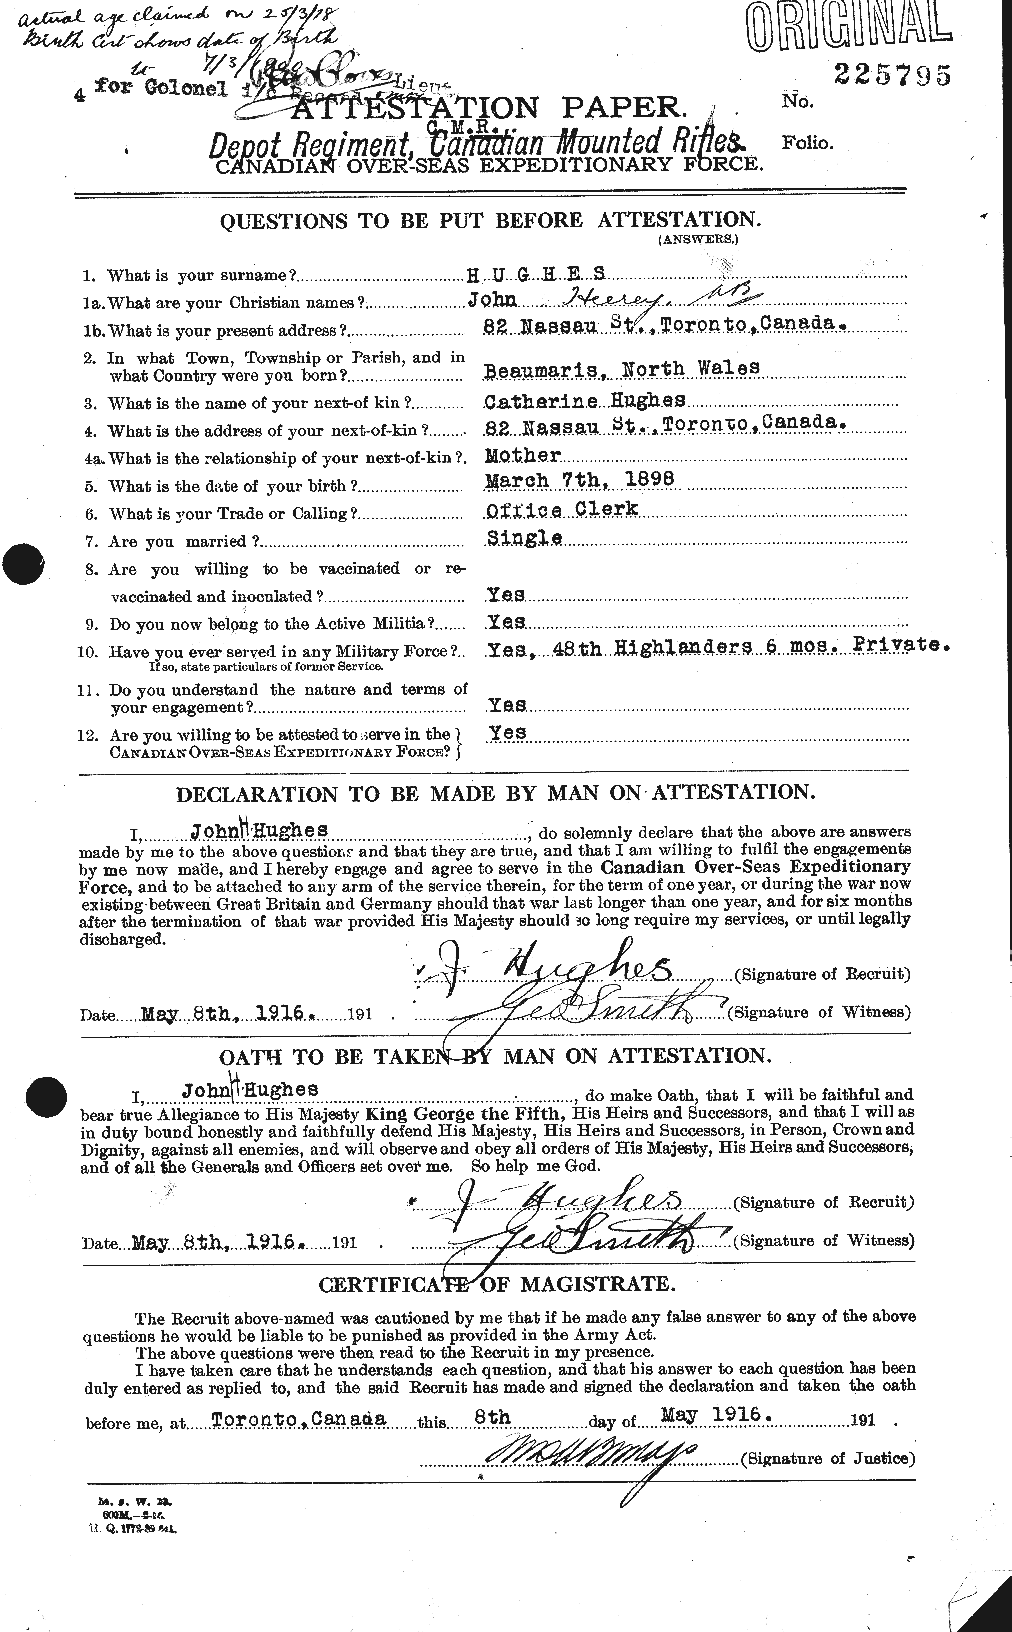 Personnel Records of the First World War - CEF 404026a